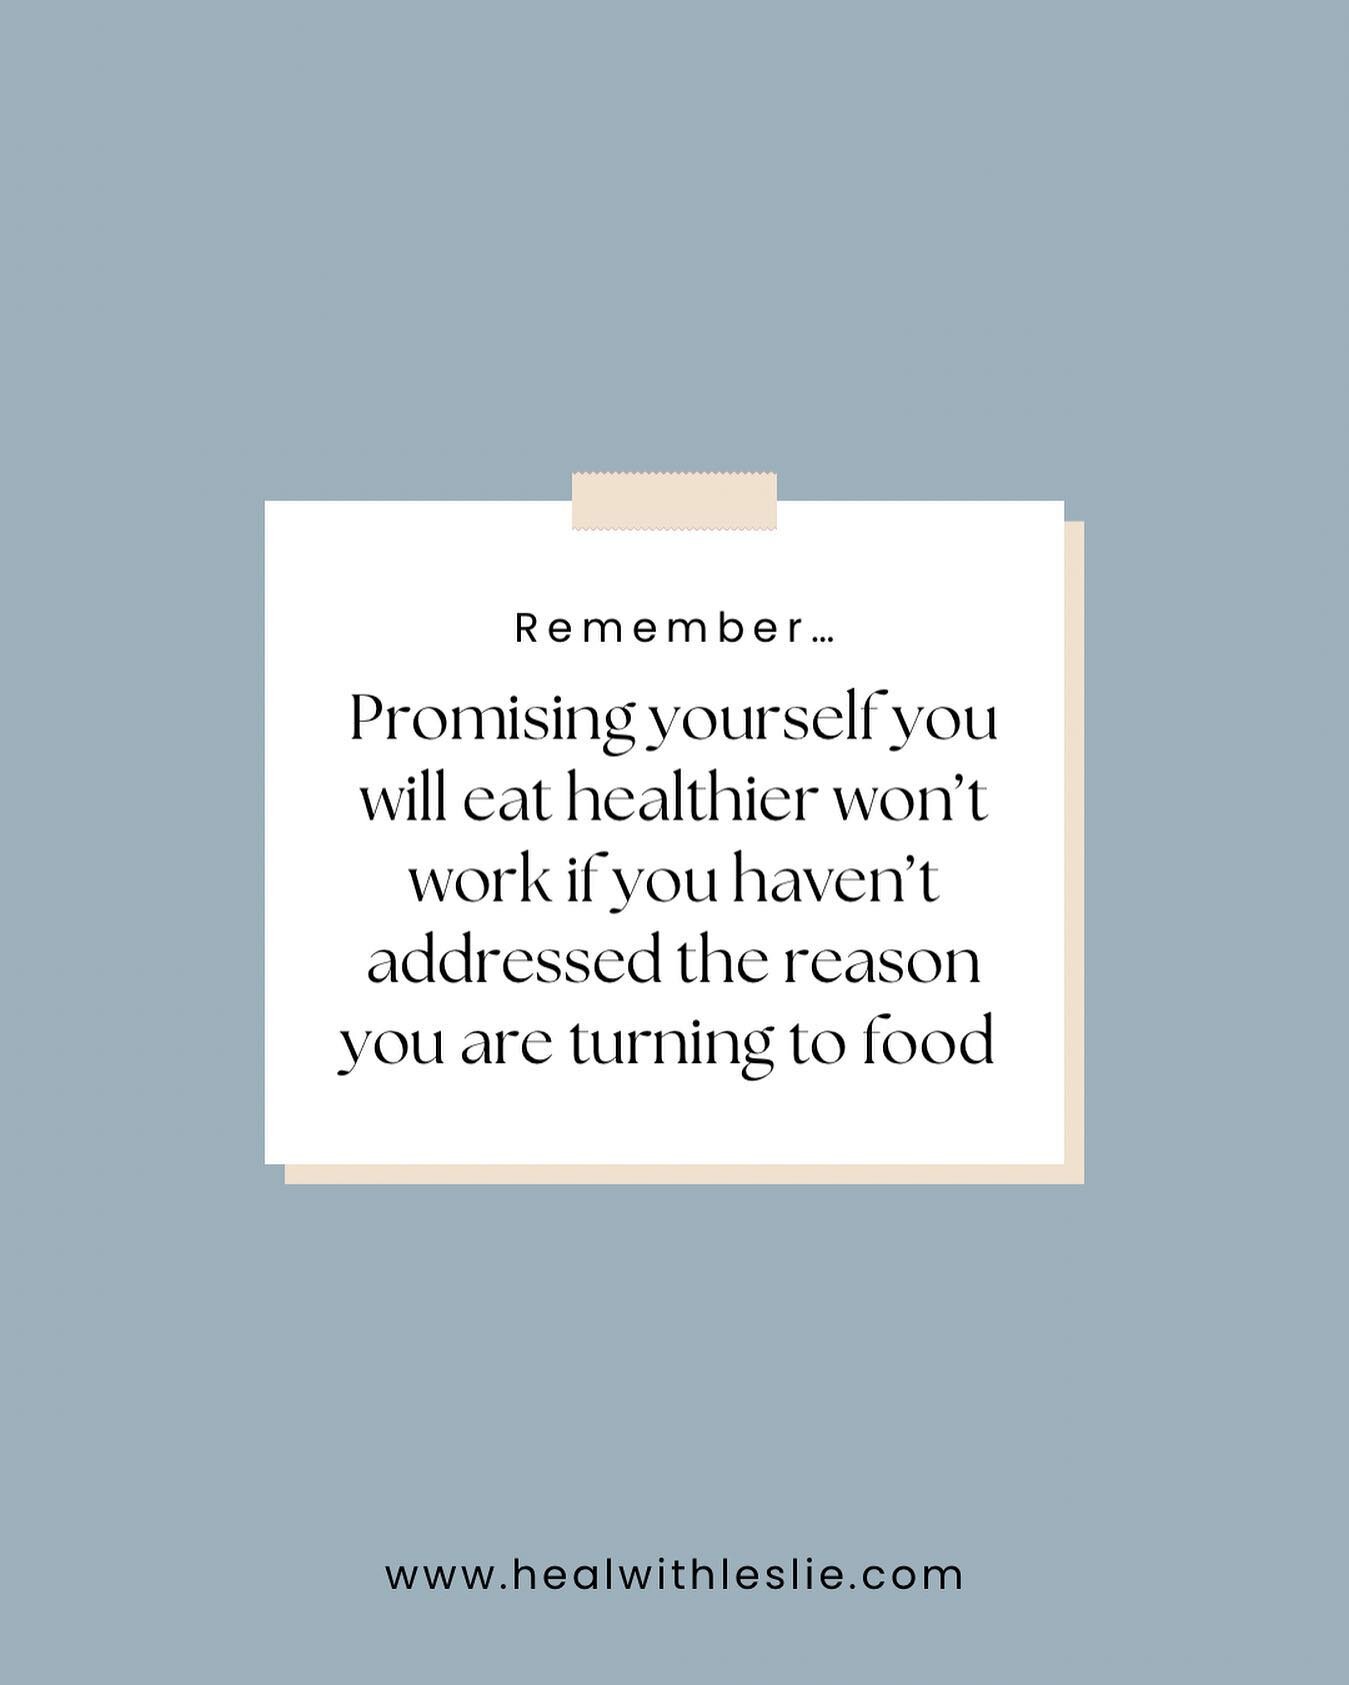 We are so quick to add more to our to do list, &ldquo;this week I&rsquo;m gonna eat healthy and work out!&rdquo; 

And yet on the inside we&rsquo;ve only ADDED to the stress by putting MORE pressure on ourselves.

Eating healthy and movement IS impor